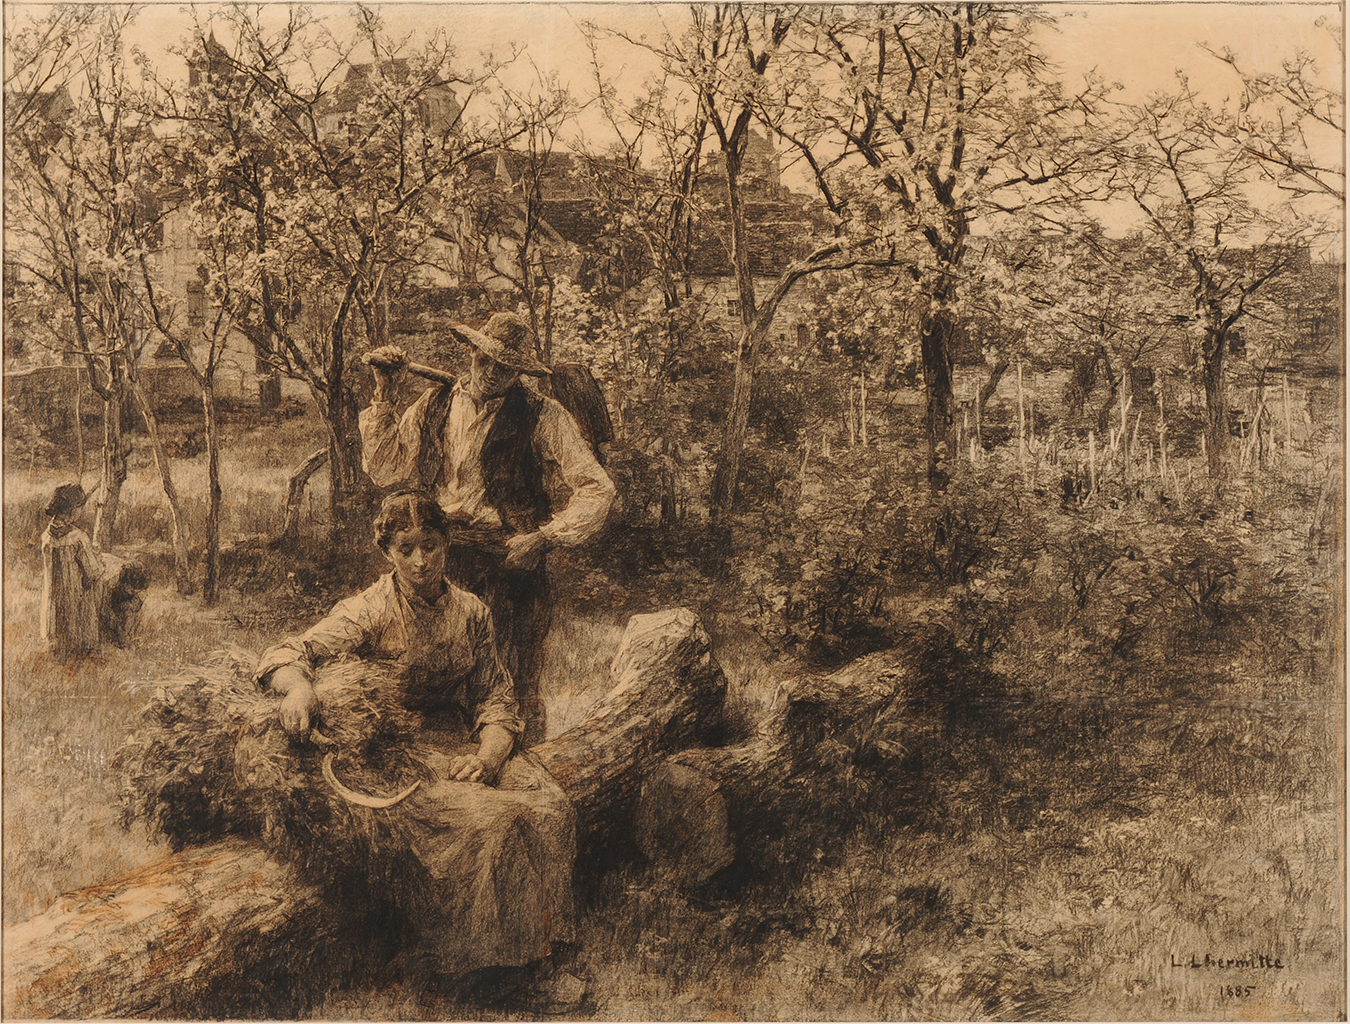 A charcoal drawing of a woman sitting down on a fallen tree log. Behind her, a man stands holding an axe watches her. In the background there are more trees which cover up a small town.